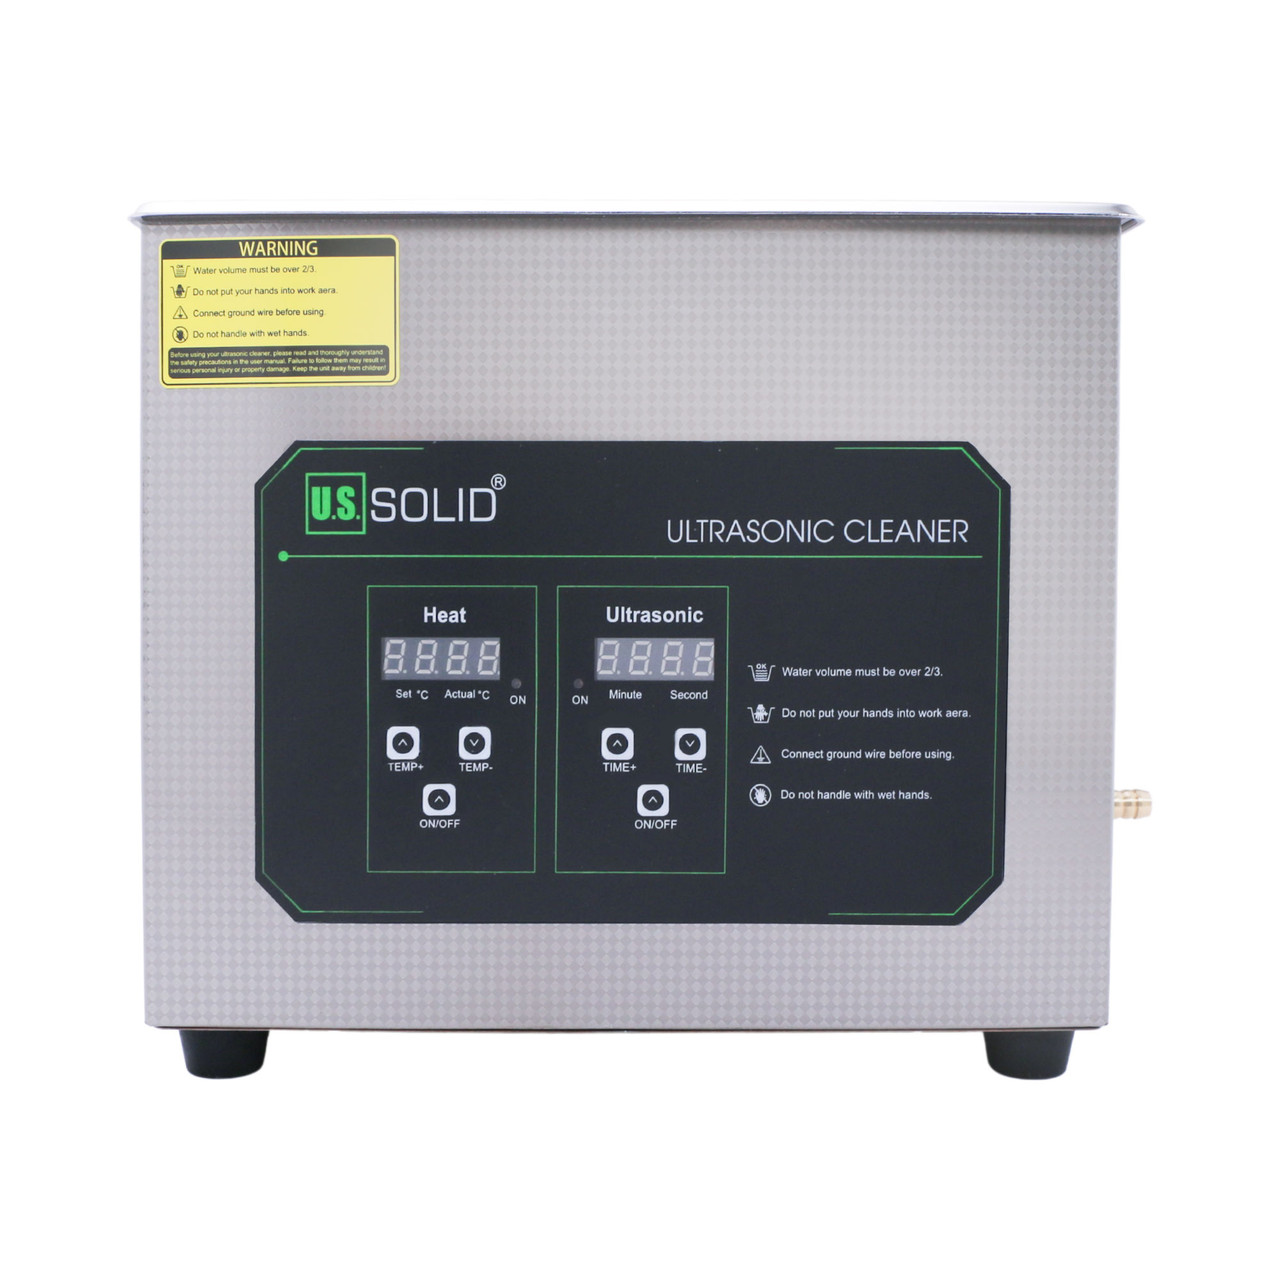 U.S. Solid 10 L Ultrasonic Cleaner, 40 KHz Stainless Steel